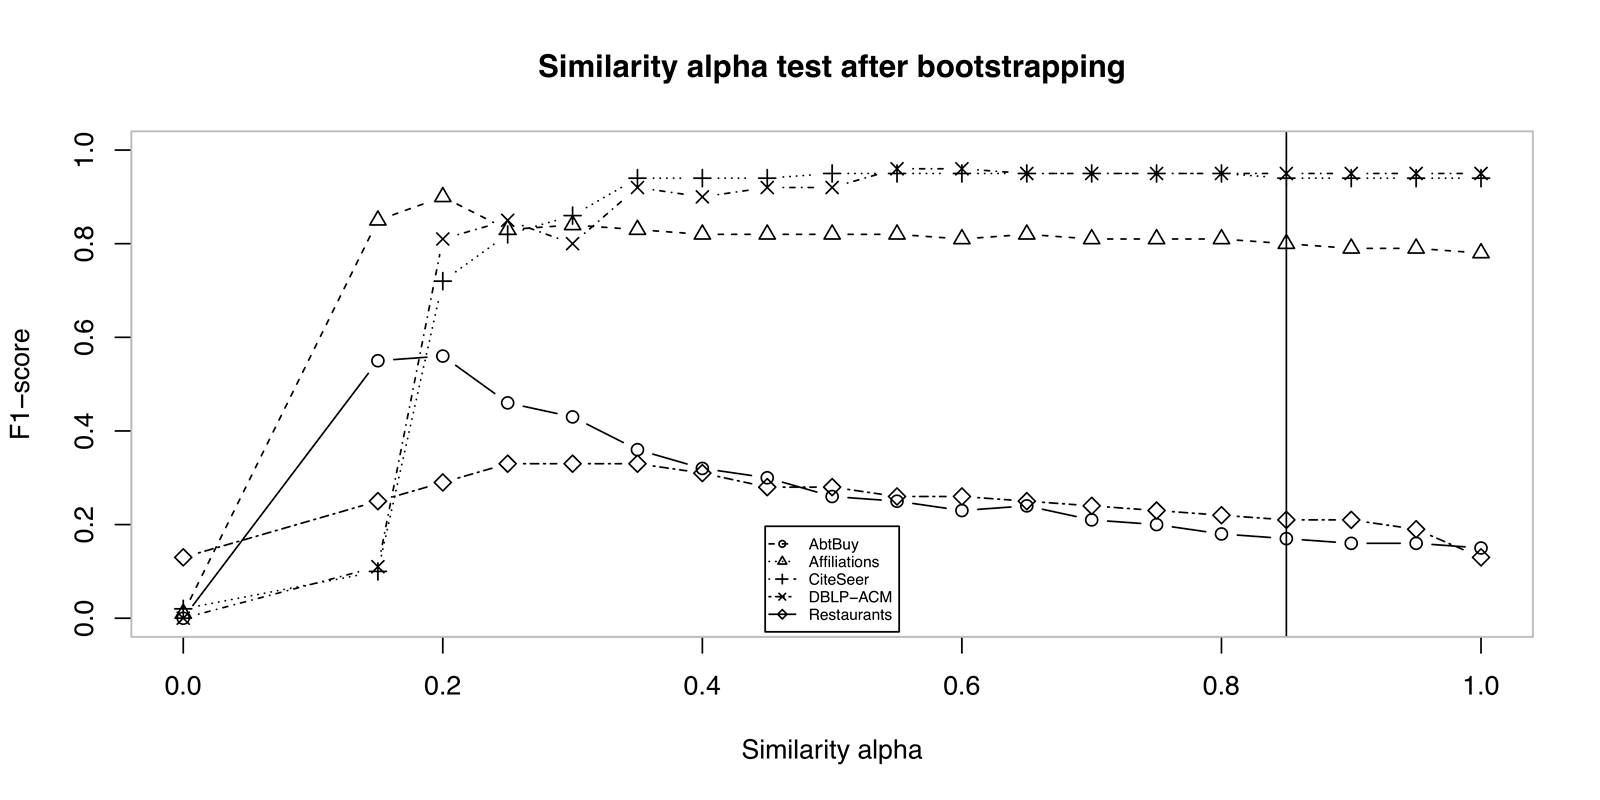 Comparison of entity resolution results after bootstrapping according to similarity alpha.